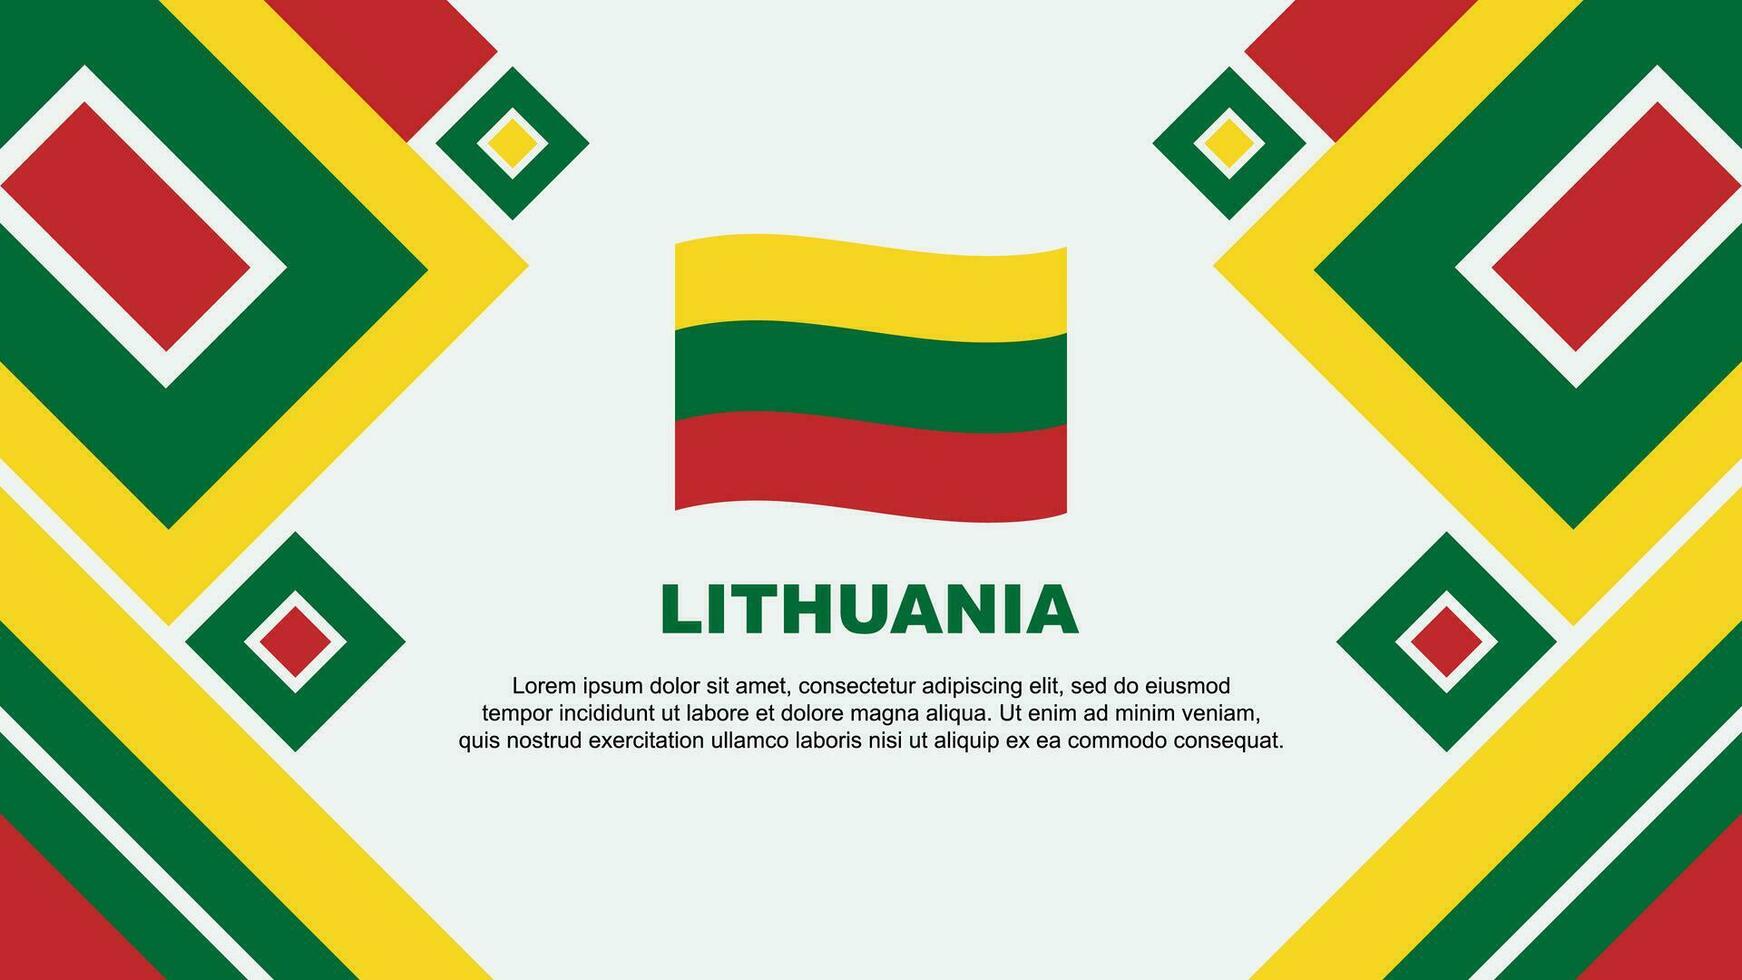 Lithuania Flag Abstract Background Design Template. Lithuania Independence Day Banner Wallpaper Vector Illustration. Lithuania Cartoon